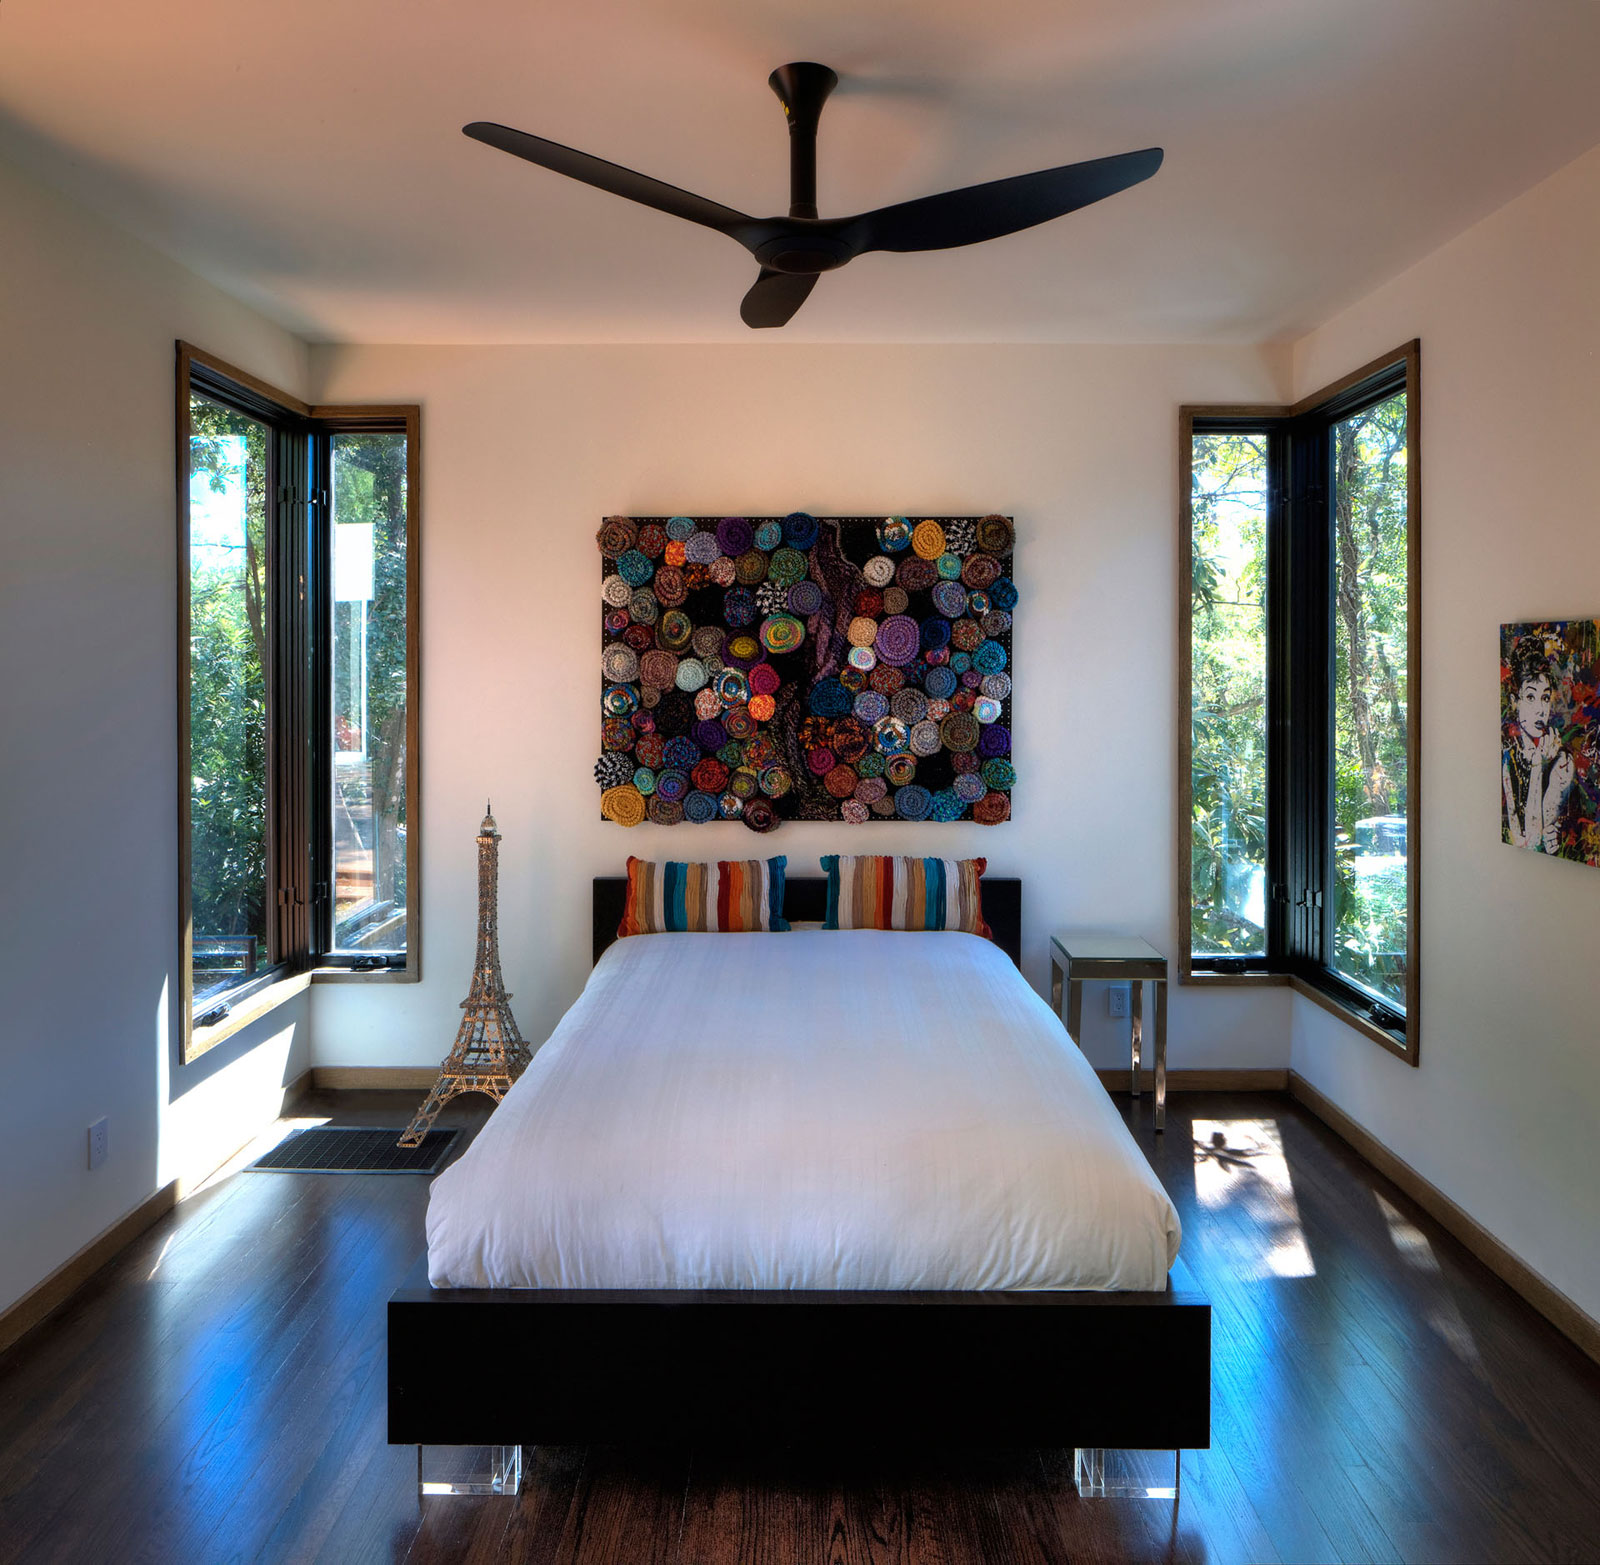 Ceiling Fans Interior Modern Ceiling Fans In Bedroom Interior Decorated With Tropical Minimalist Style Using Wooden Flooring And White Bedding Decoration Modern Ceiling Fans In Contemporary Style